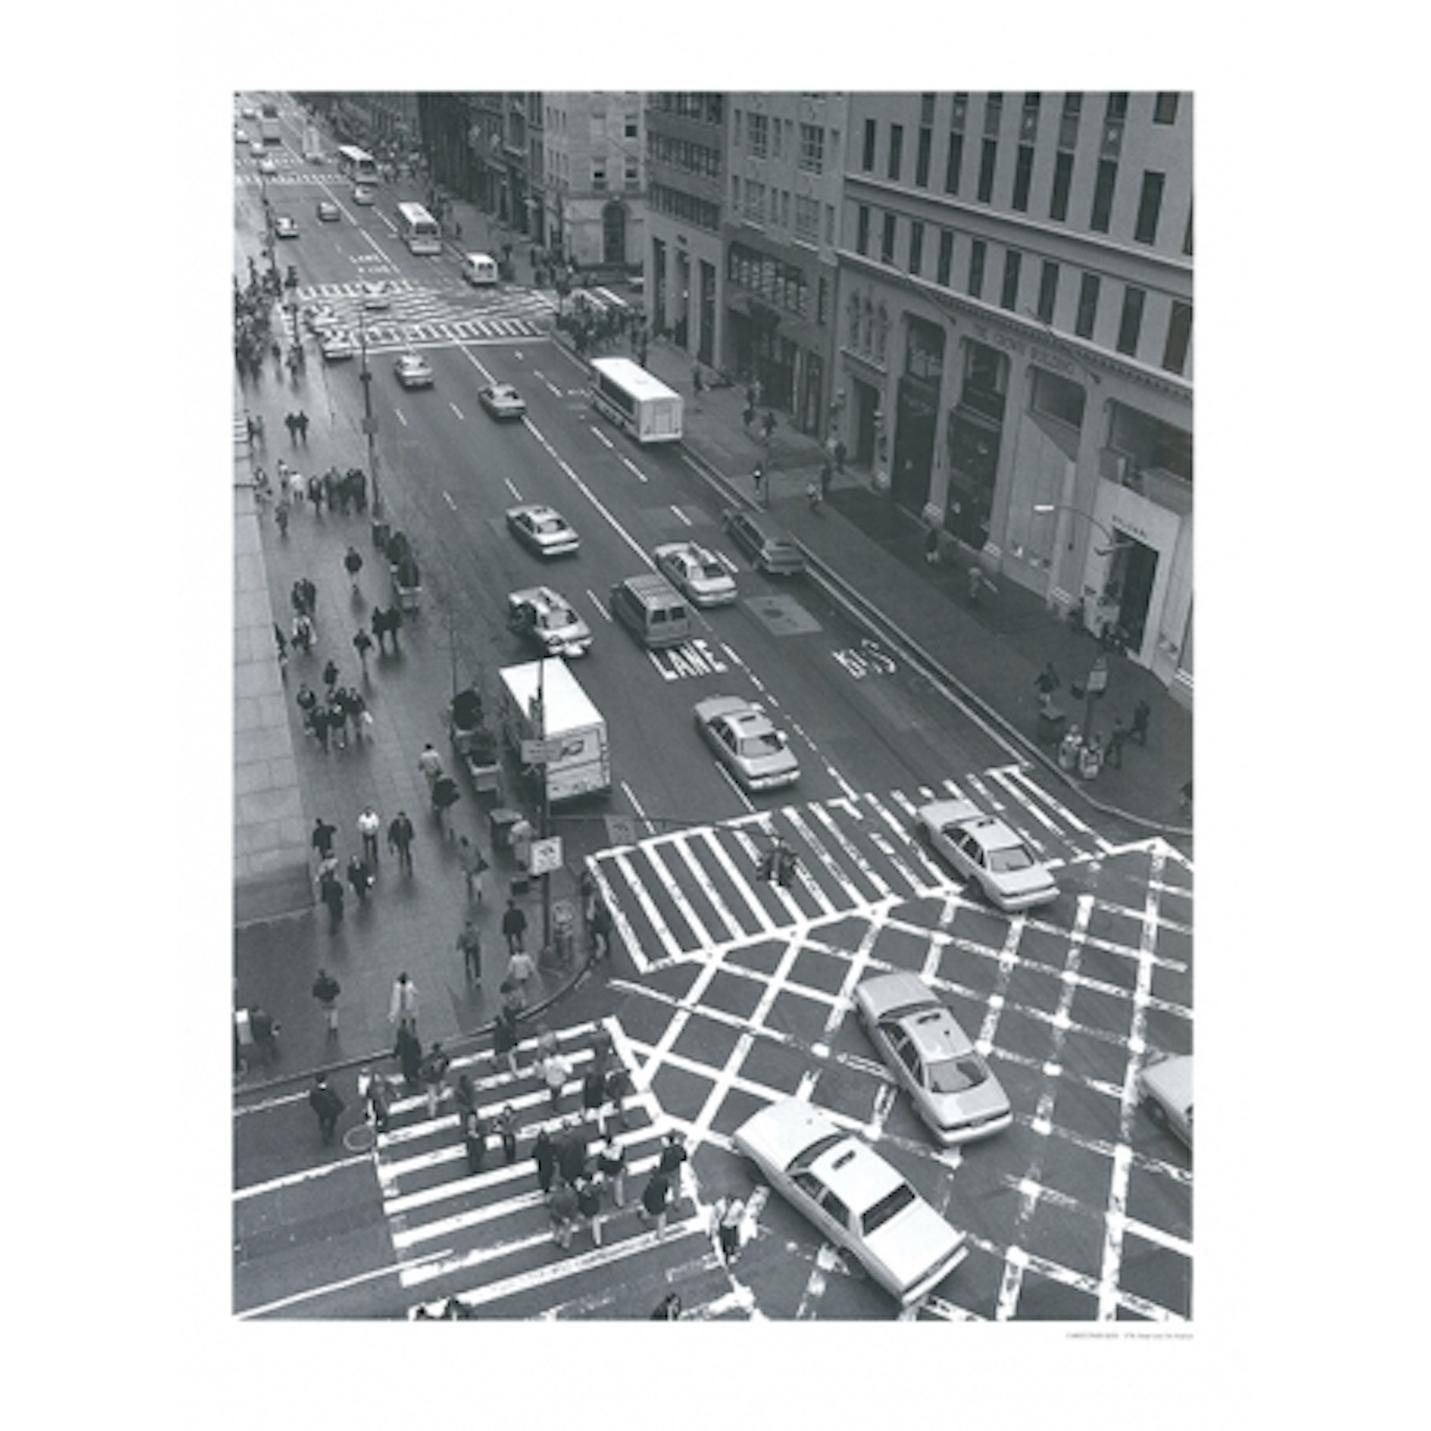 The street crossing of NYC’s 57th Street and 5th Avenue that appears in the greyness of the digital photo shows the dynamics of the movement of people, cars and architecture.
Christopher Bliss is a New York based photographer who has always been